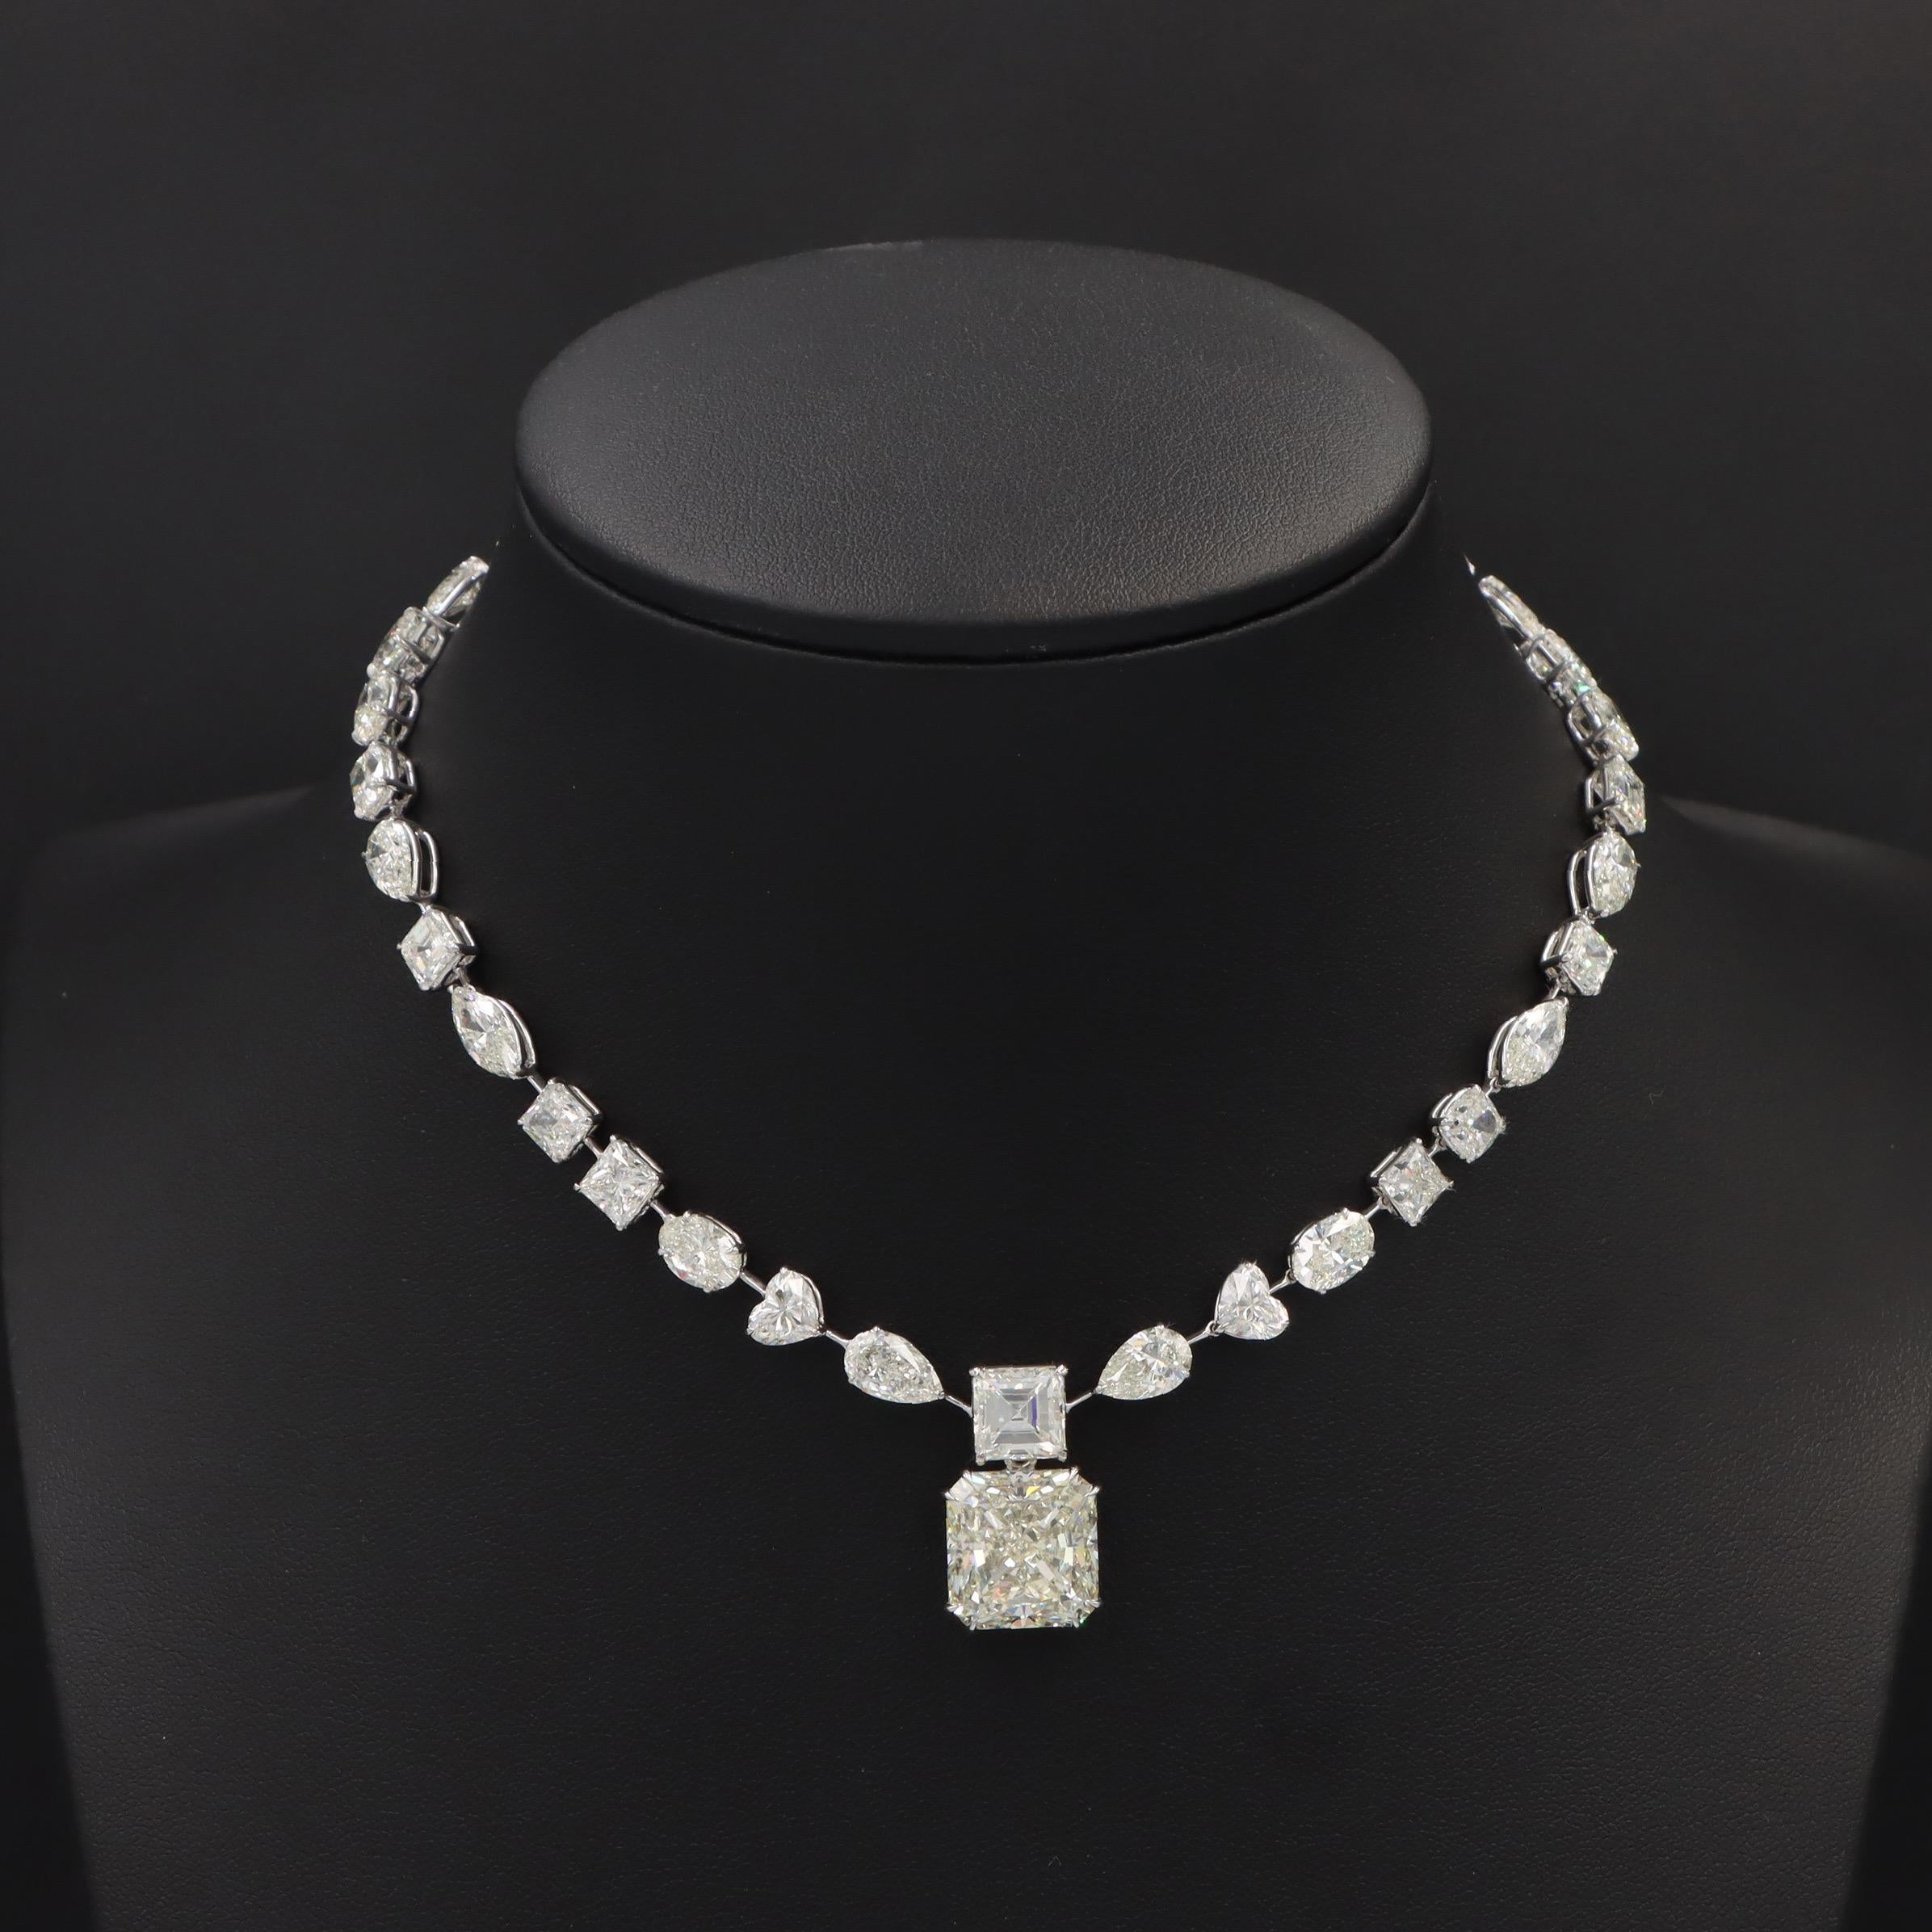 From the Museum Vault At Emilio Jewelry located on New York's Iconic Fifth Avenue,
A magnificent necklace hand made in the Emilio Atelier, the focal point of this necklace is the Center drop radiant diamond weighing over 15.00 carats alone and Gia